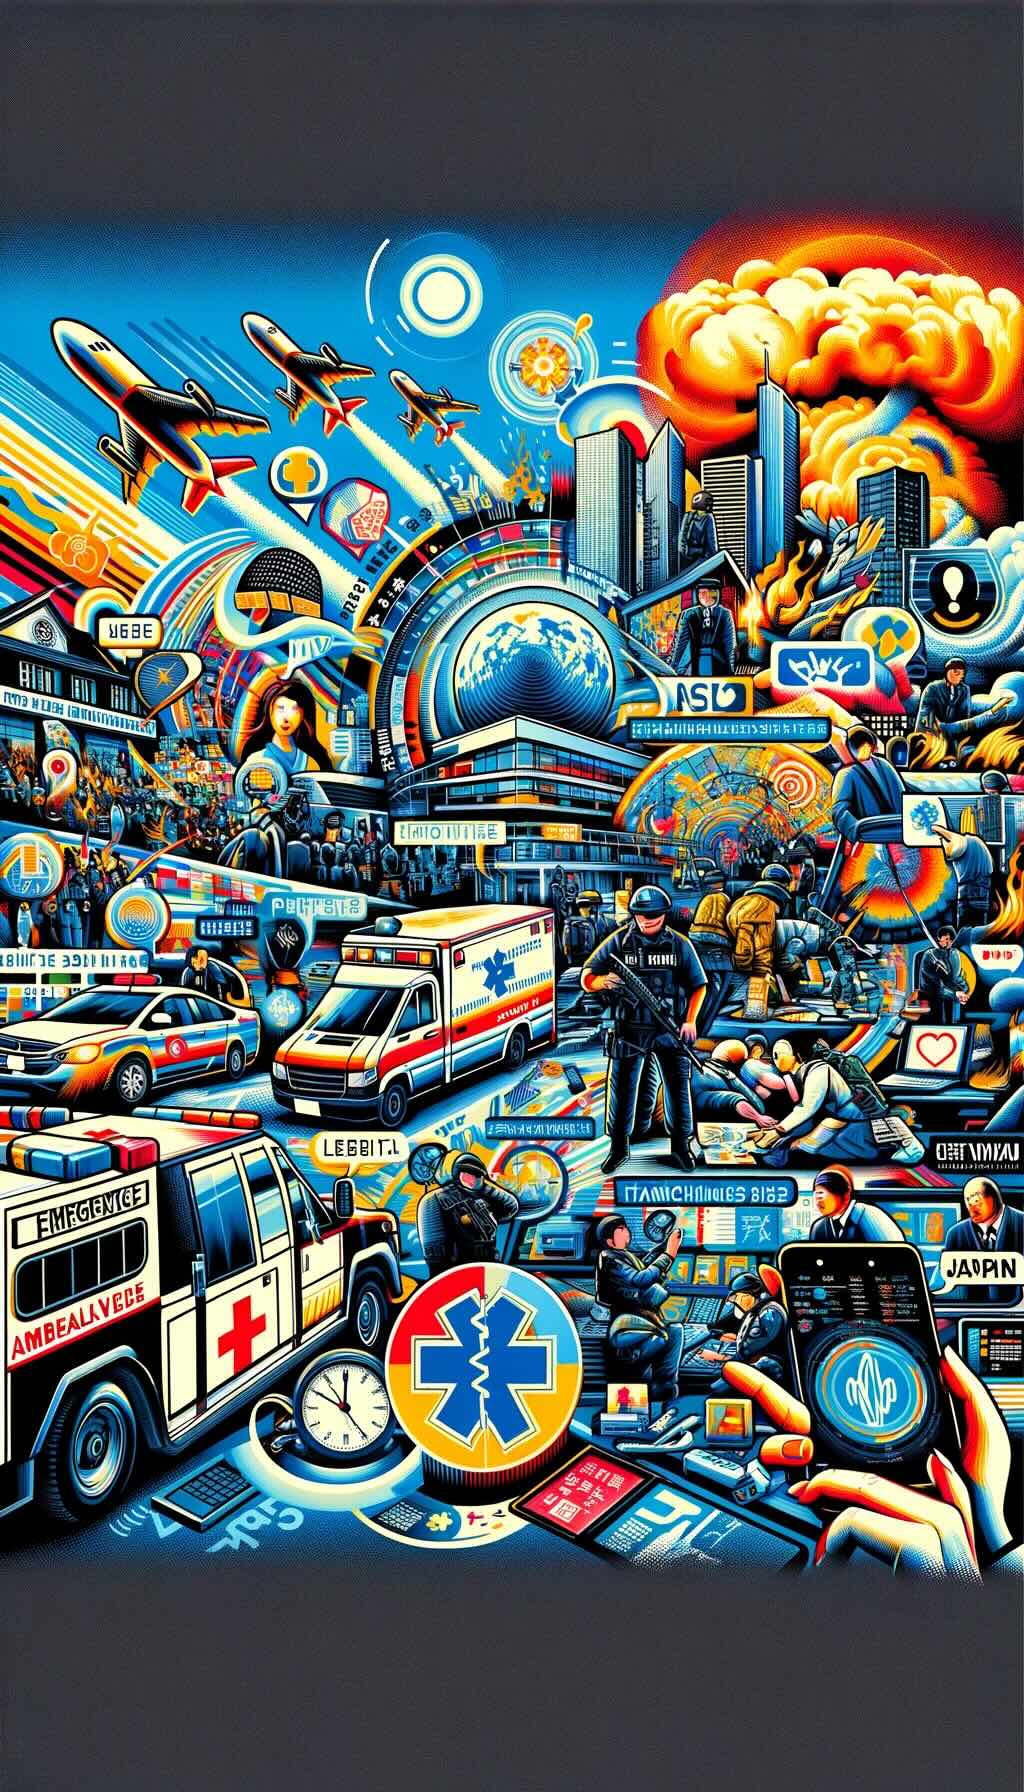 Illustrating emergency preparedness in Japan. The artwork depicts the advanced emergency services system in Japan, including police, fire, and ambulance services. It visualizes elements such as police officers assisting individuals, firefighters in action, ambulances providing medical care, and travelers navigating language barriers with translation apps or phrasebooks. The image also includes scenes showing public broadcast systems during major disasters and travelers preparing for emergencies. The artwork merges the vibrant and dynamic Neo-Pop art style with the imaginative and structured Neo-Avant Garde style, highlighting the efficiency and community-oriented approach of Japan's emergency services